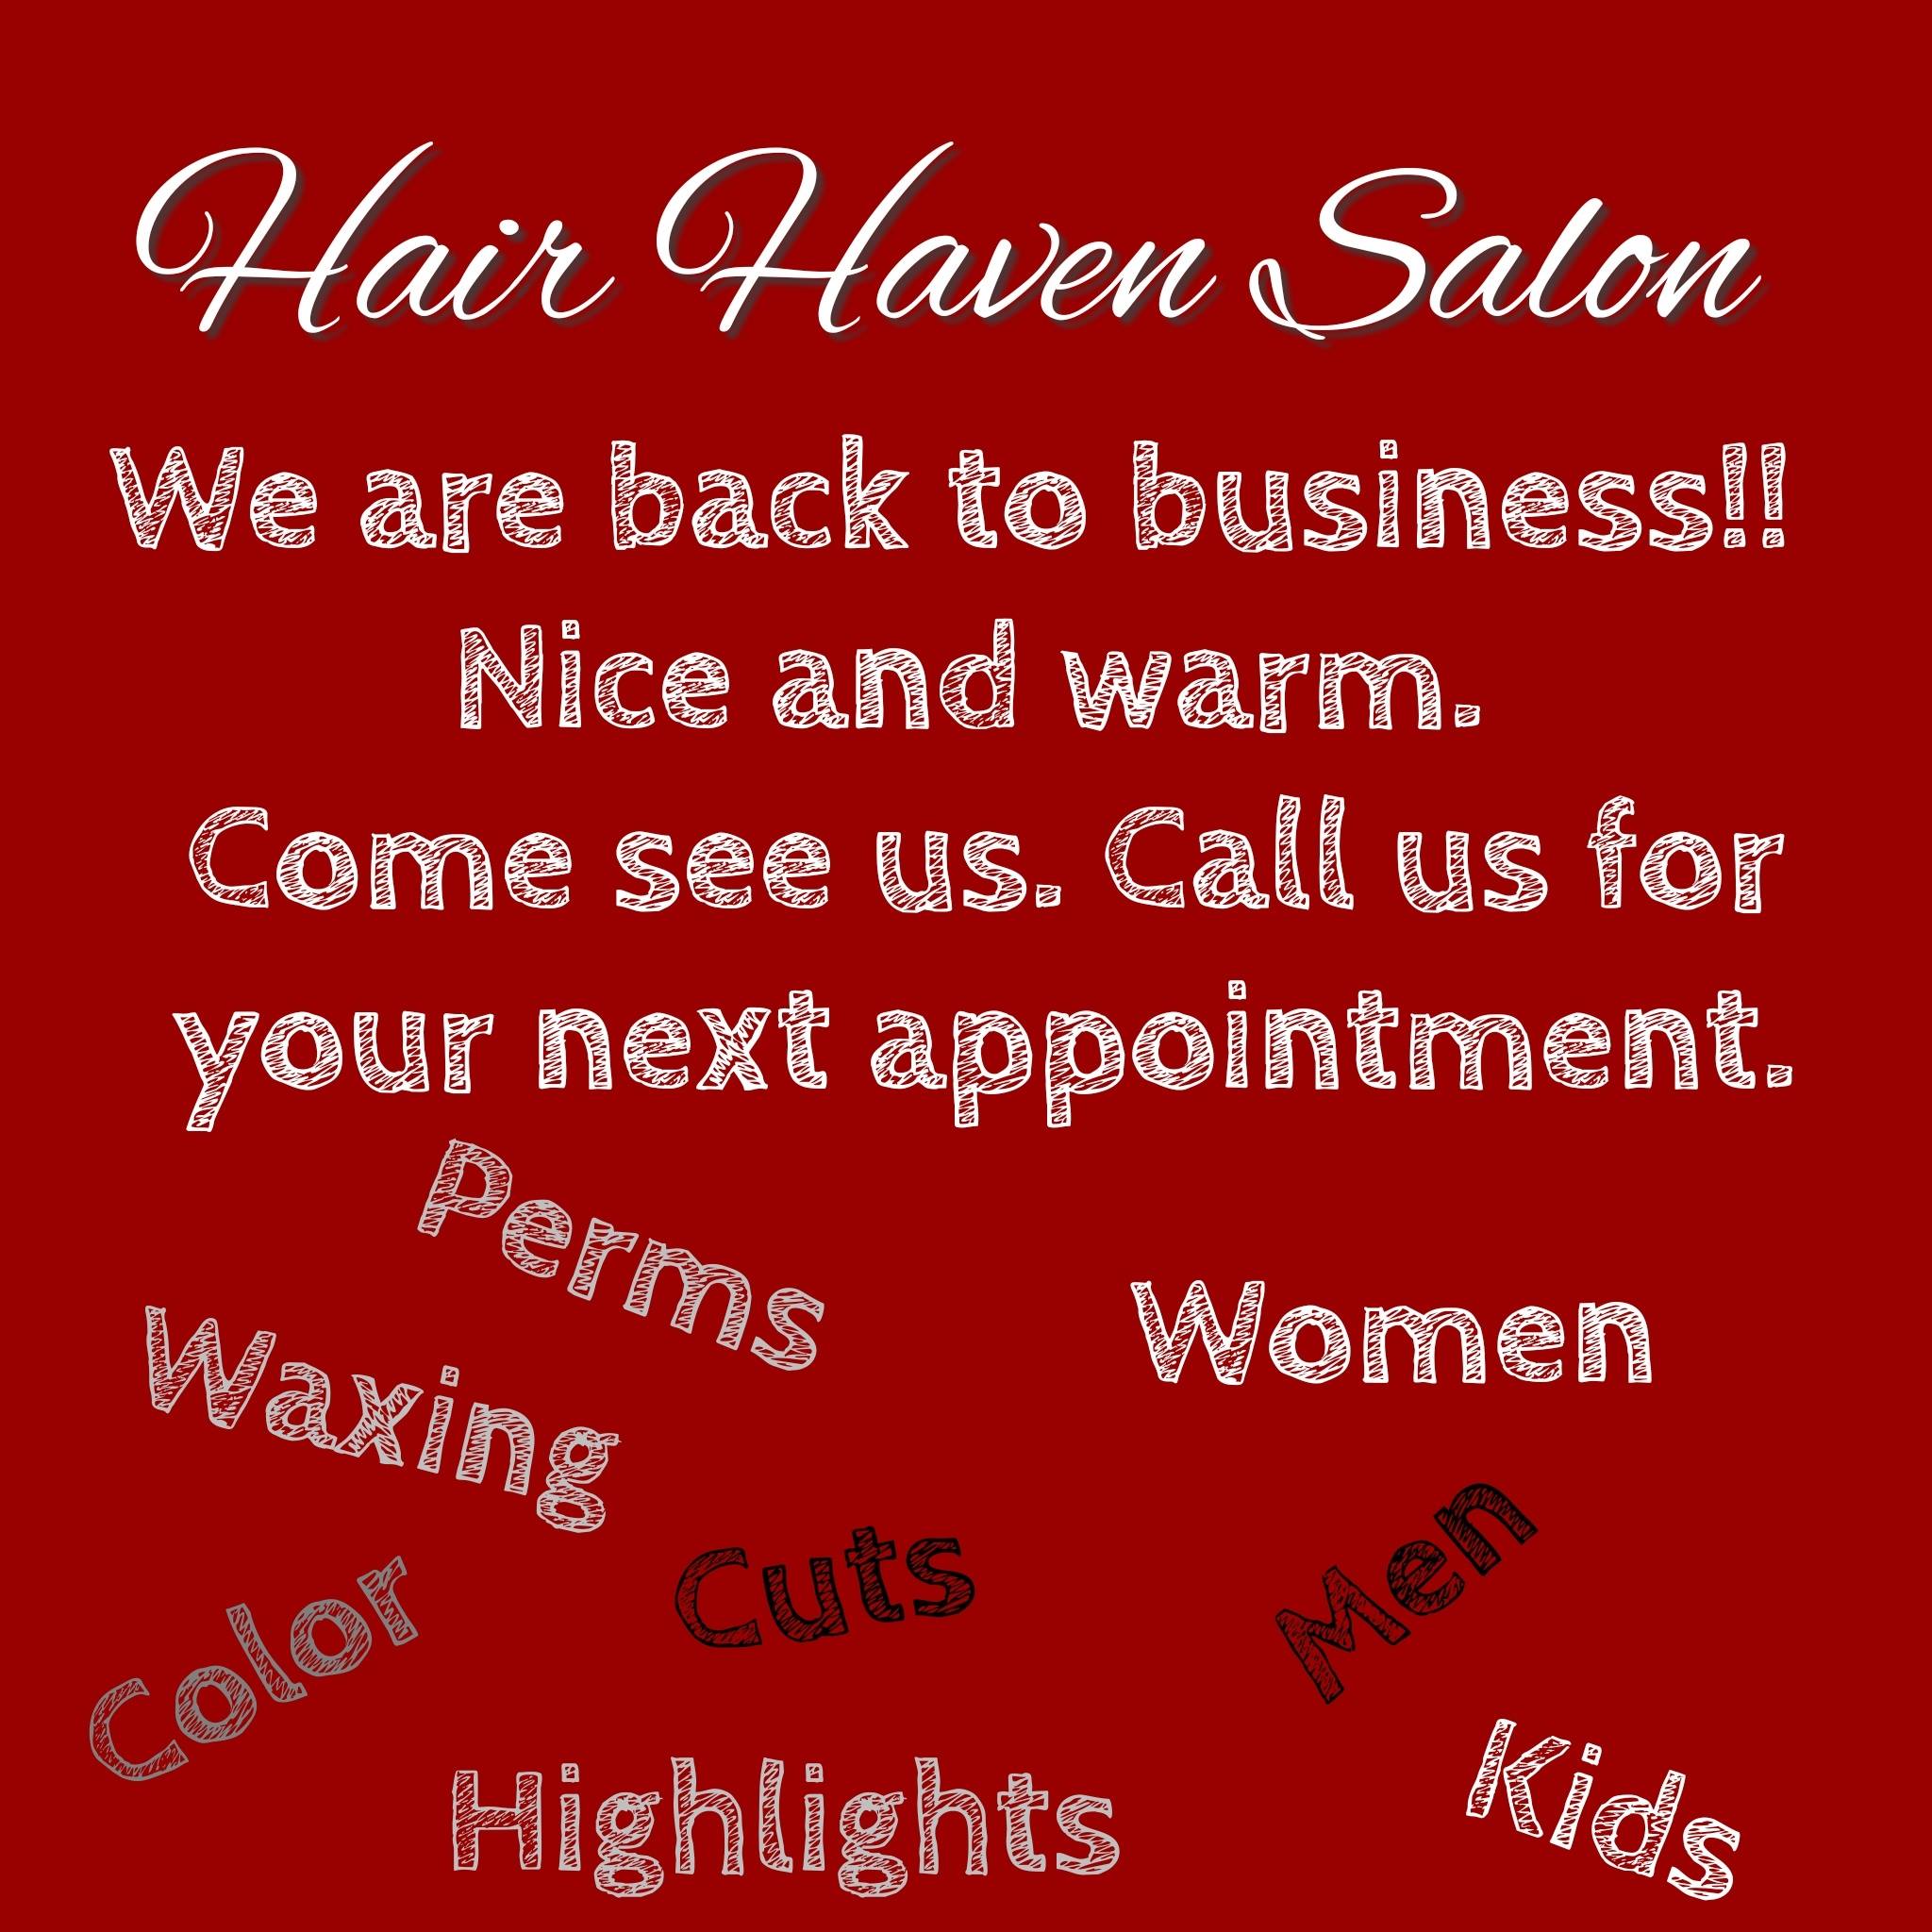 Hair Haven Salon 216 W 2nd St, Portales New Mexico 88130